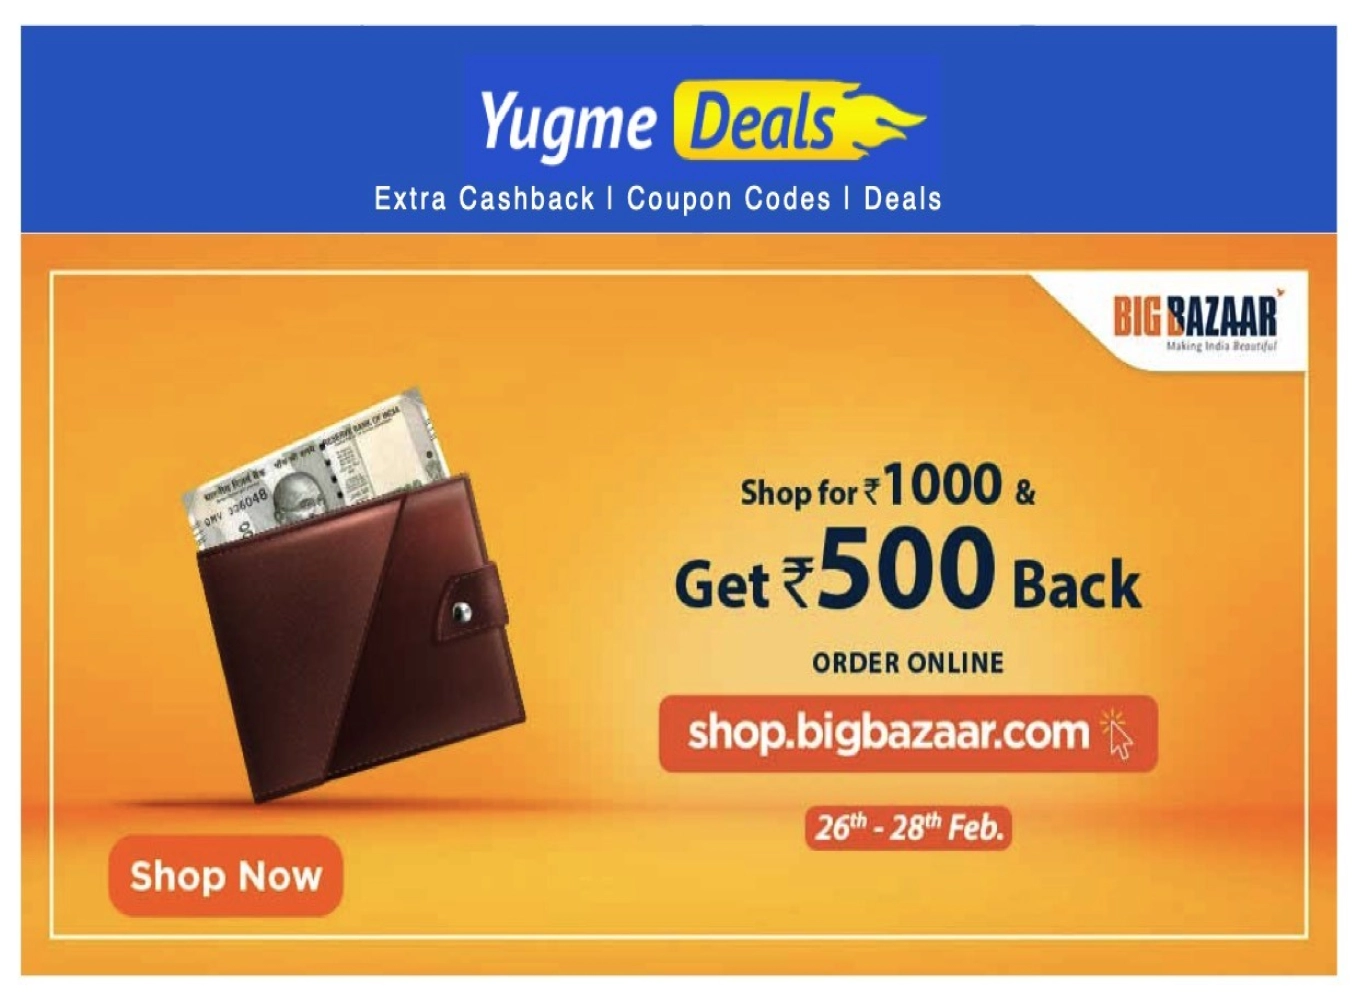 SHOP FOR RS.1000 & GET RS.500 CASHBACK ONLY ON BIG BAZAAR VIA FUTURE PAY